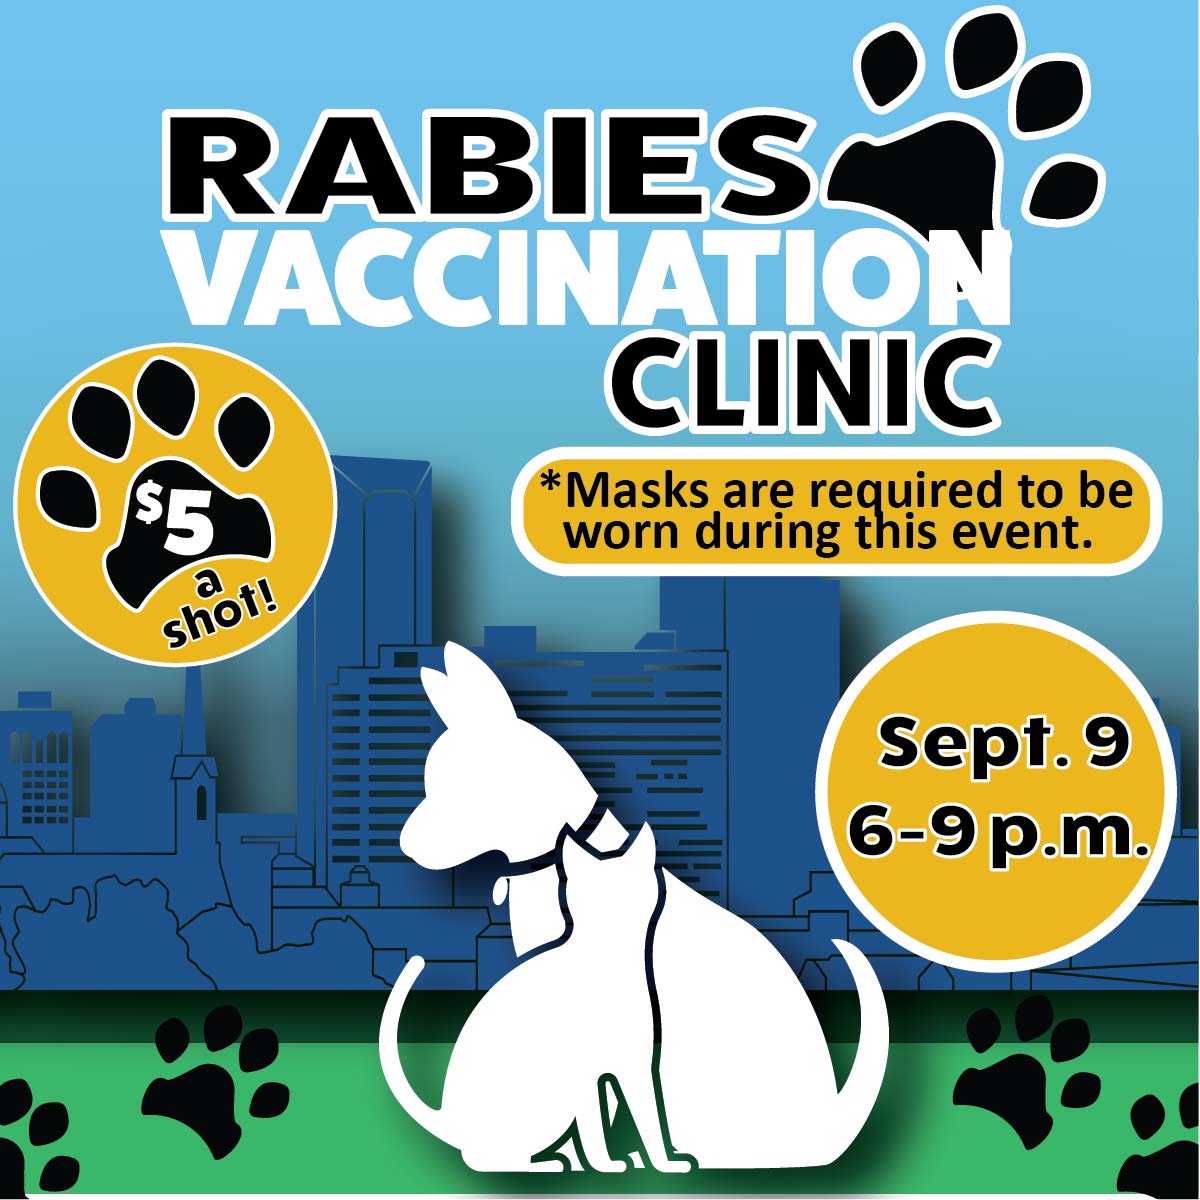 LFCHD to host low-cost rabies vaccination clinic Sept. 9 at Douglass Park